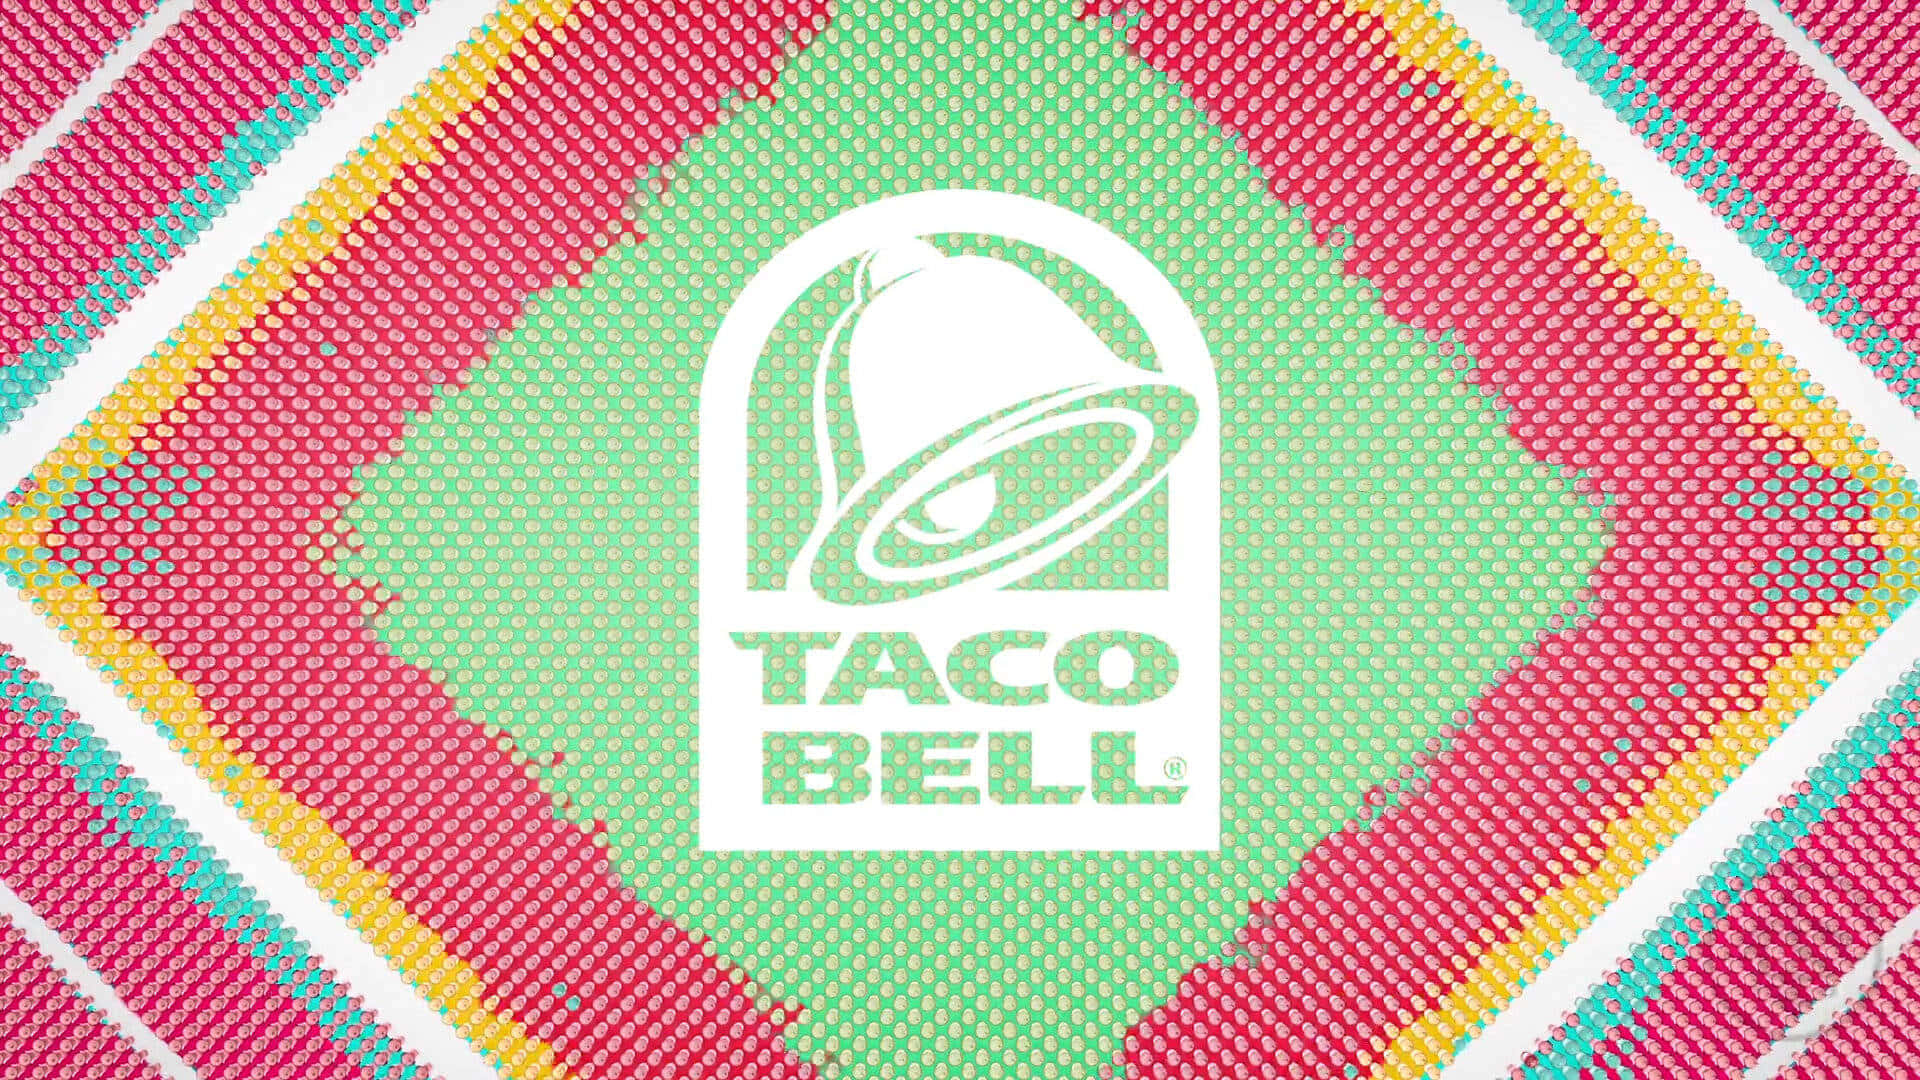 Spice up Your Life With an Authentic Taco Bell Experience